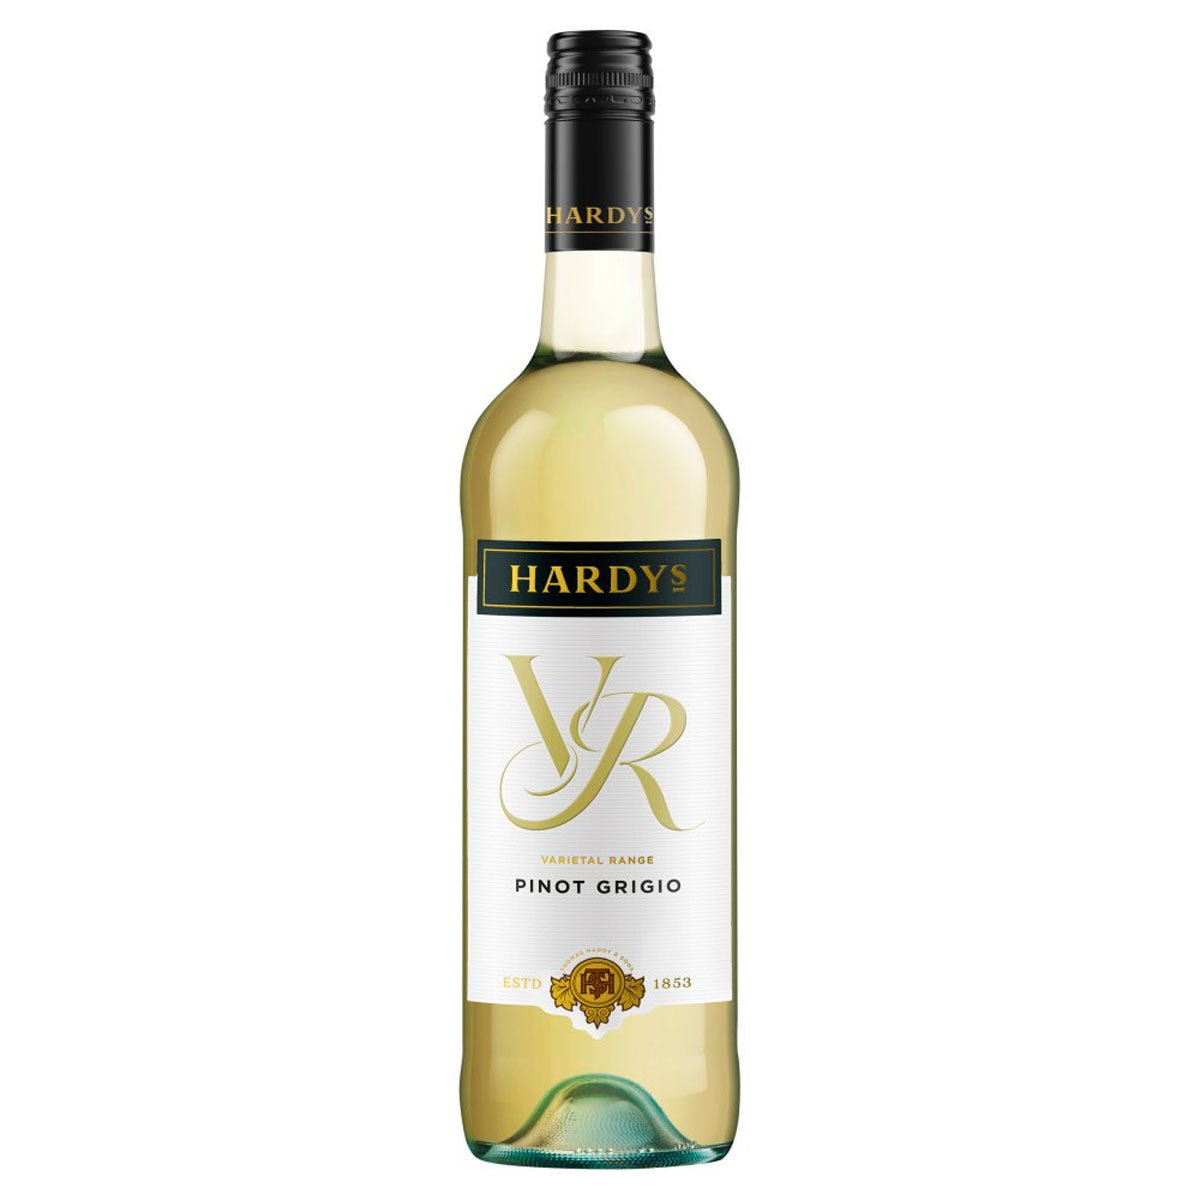 A bottle of Hardys - VR Pinot Grigio (11% ABV) - 750ml on a white background.